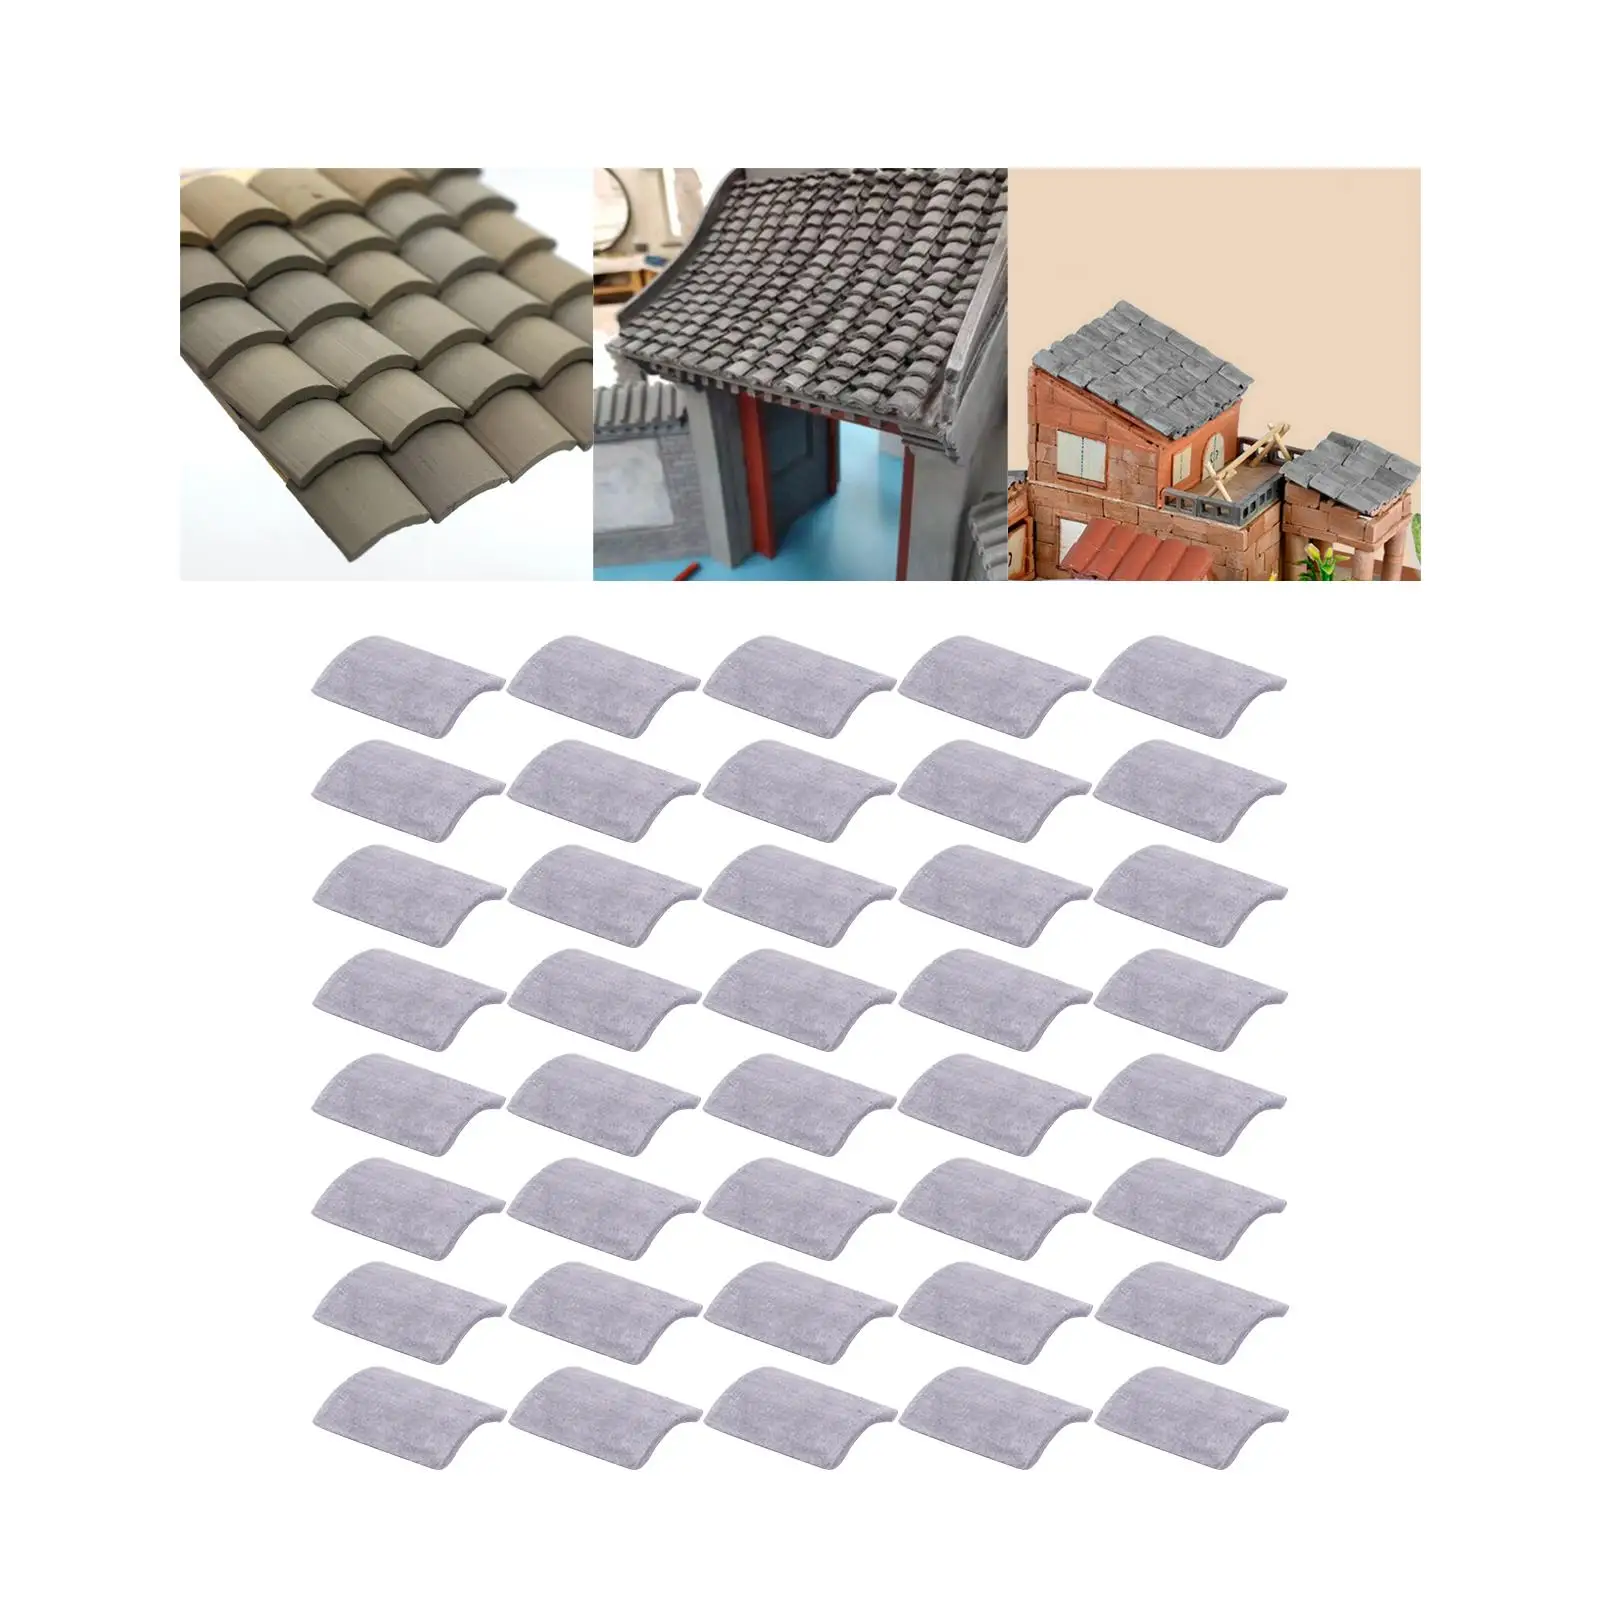 Grey Roof Tiles Model Building Set Dollhouse Scenery Miniature 1/16 Grey Wall Bricks for Dollhouses Living Room DIY Accessories